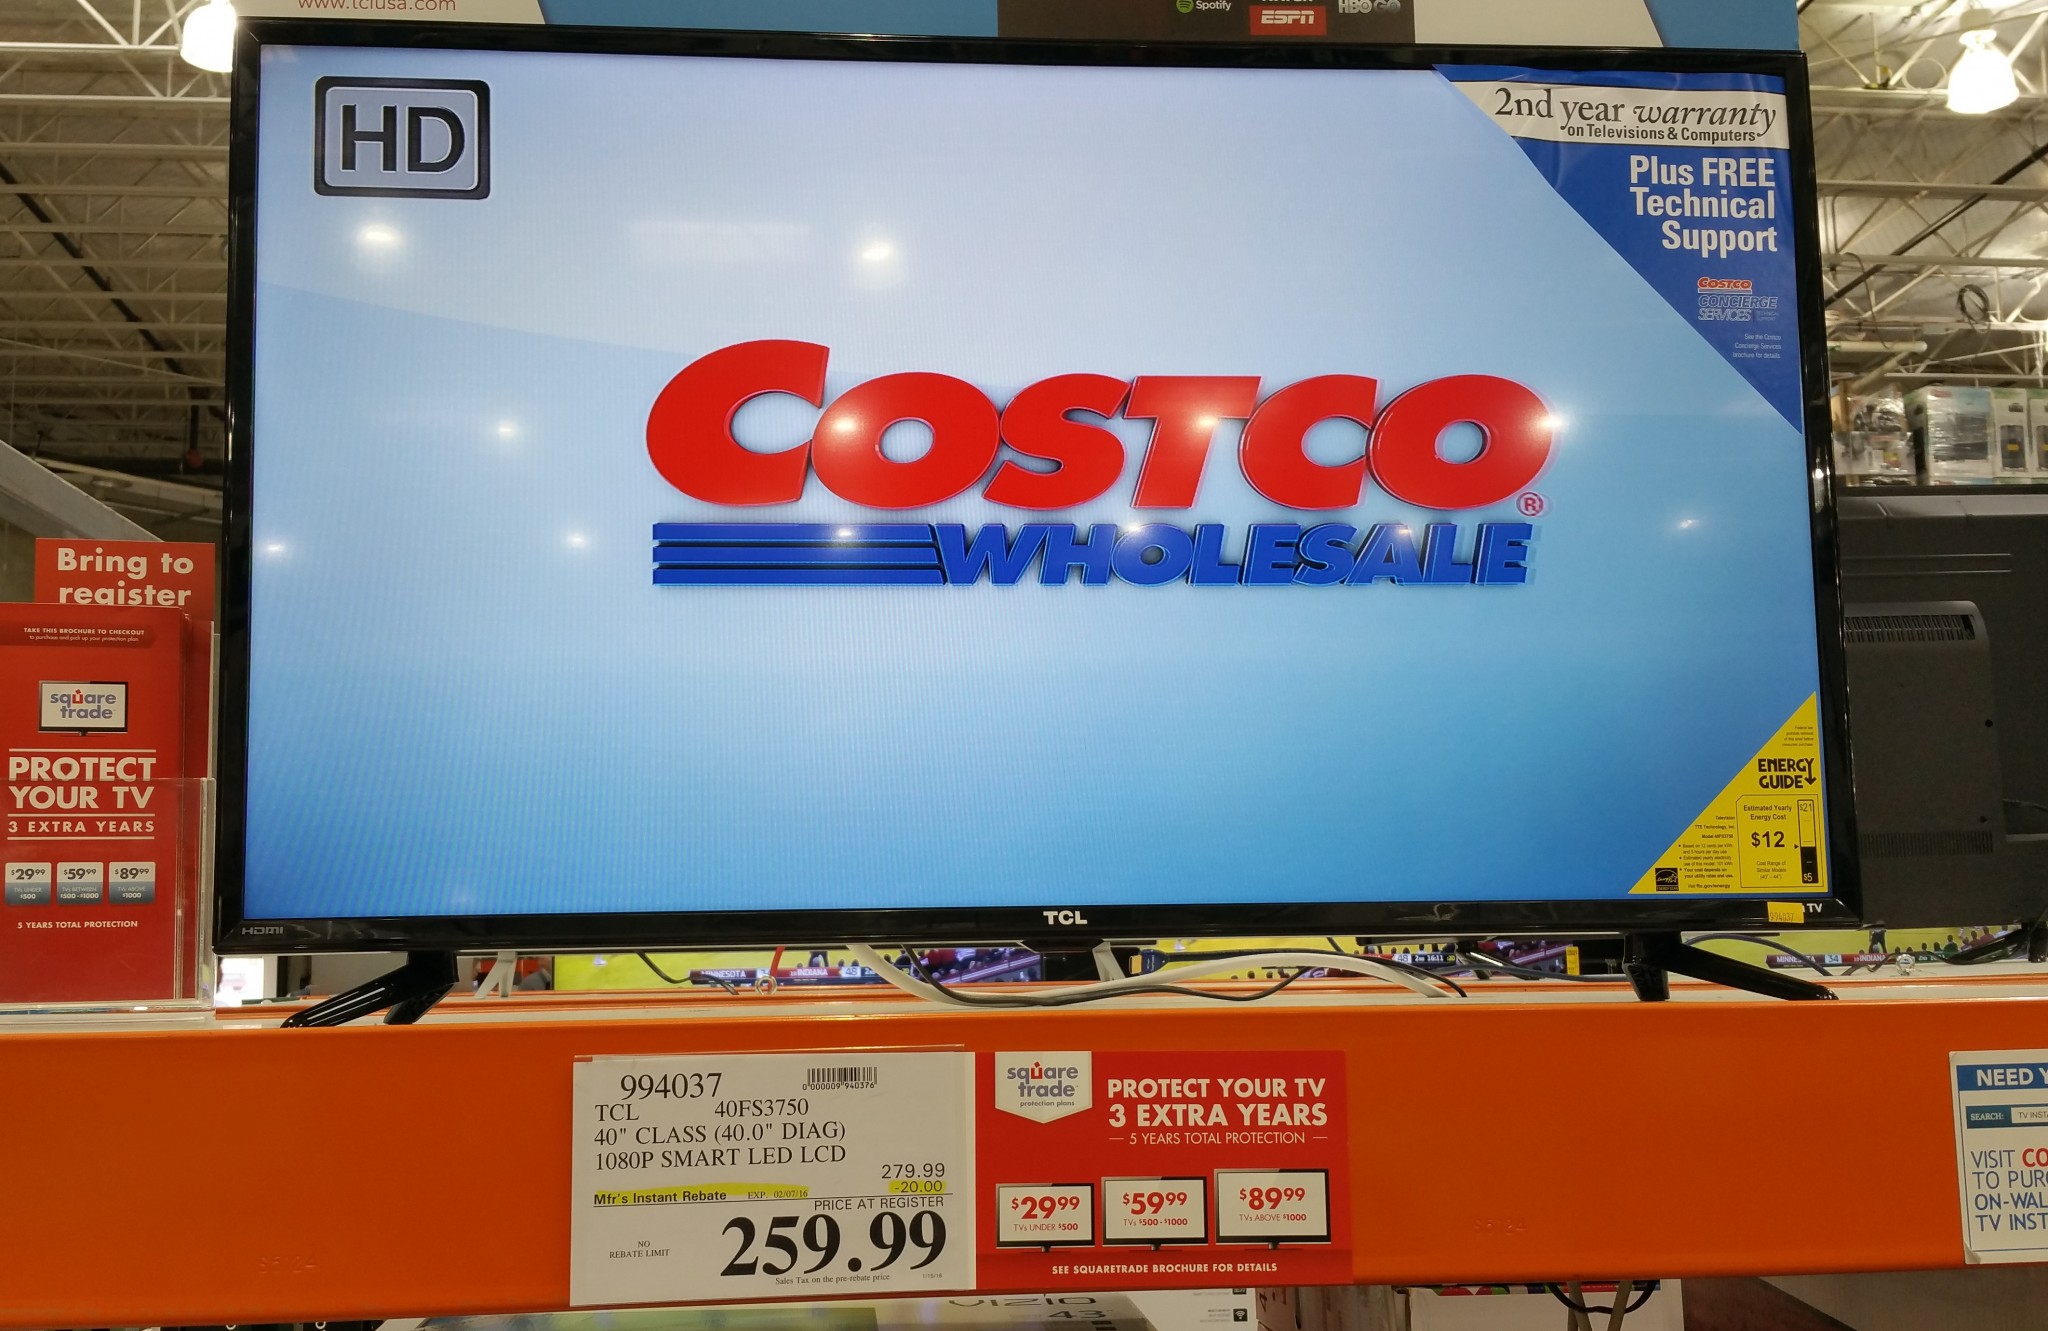 Costco February Cord Cutting Deals - Apple TVs, Roku TVs, Blue-ray Players... - Cord Cutters News